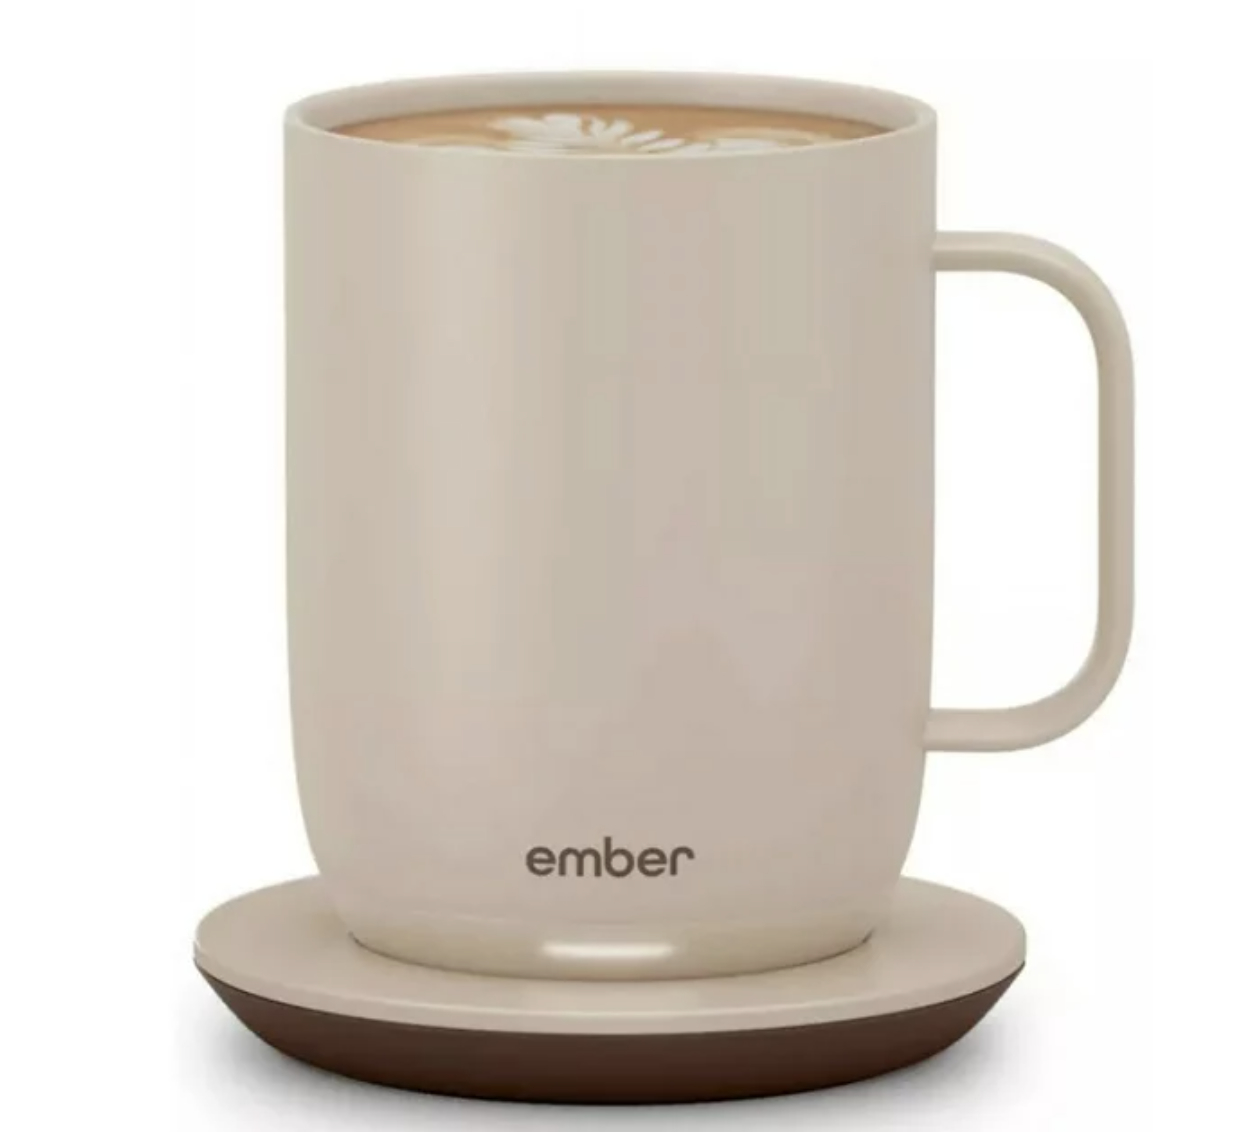 Smart mug on a charging coaster with a hot beverage